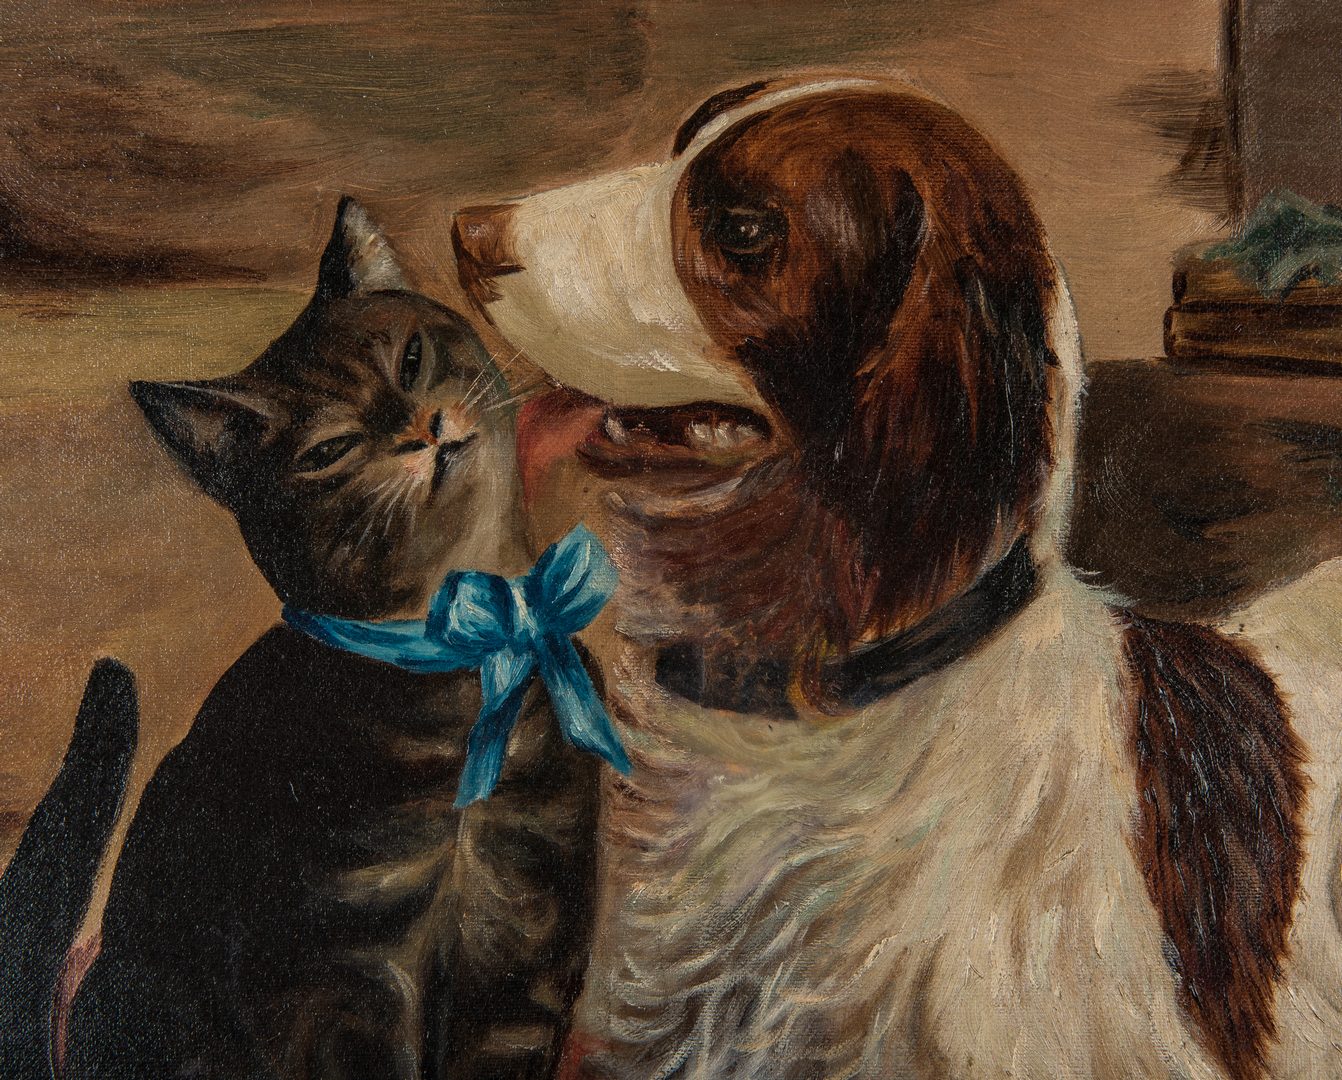 Lot 156: American School, O/C, Cat and Dog Painting